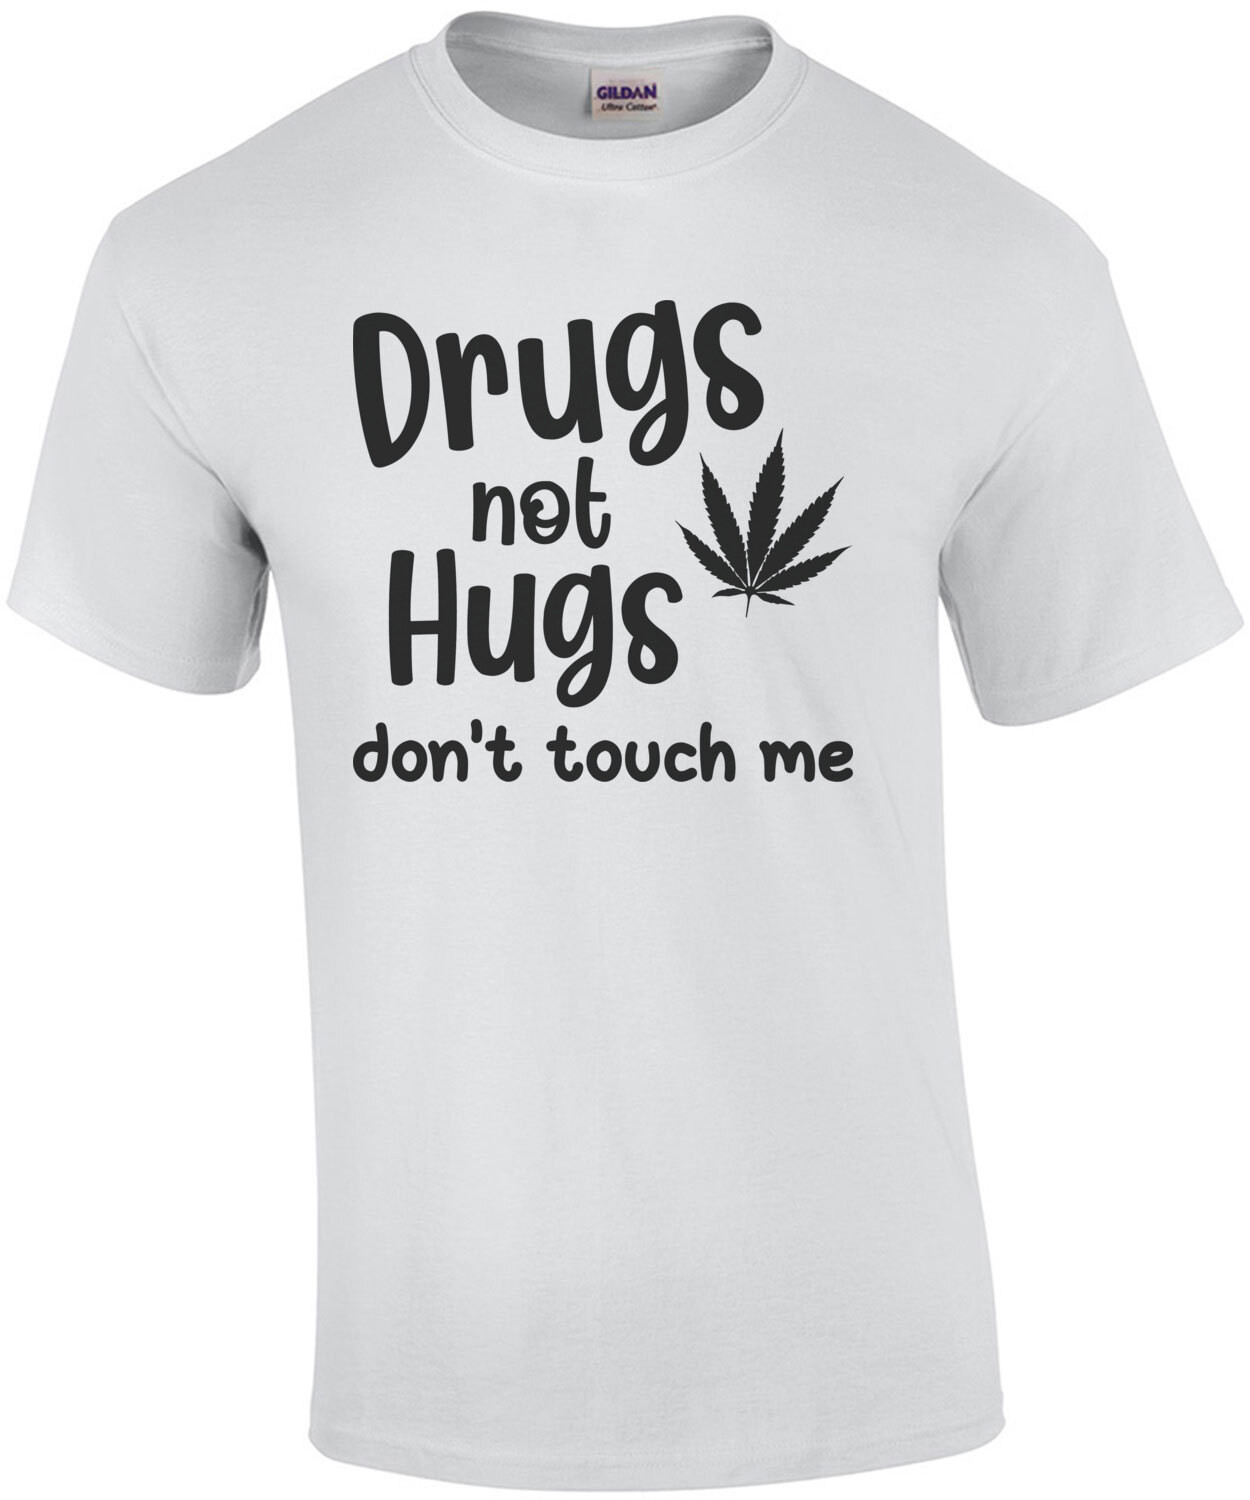 Drugs not hugs - Don't touch me - sarcastic weed funny pot t-shirt